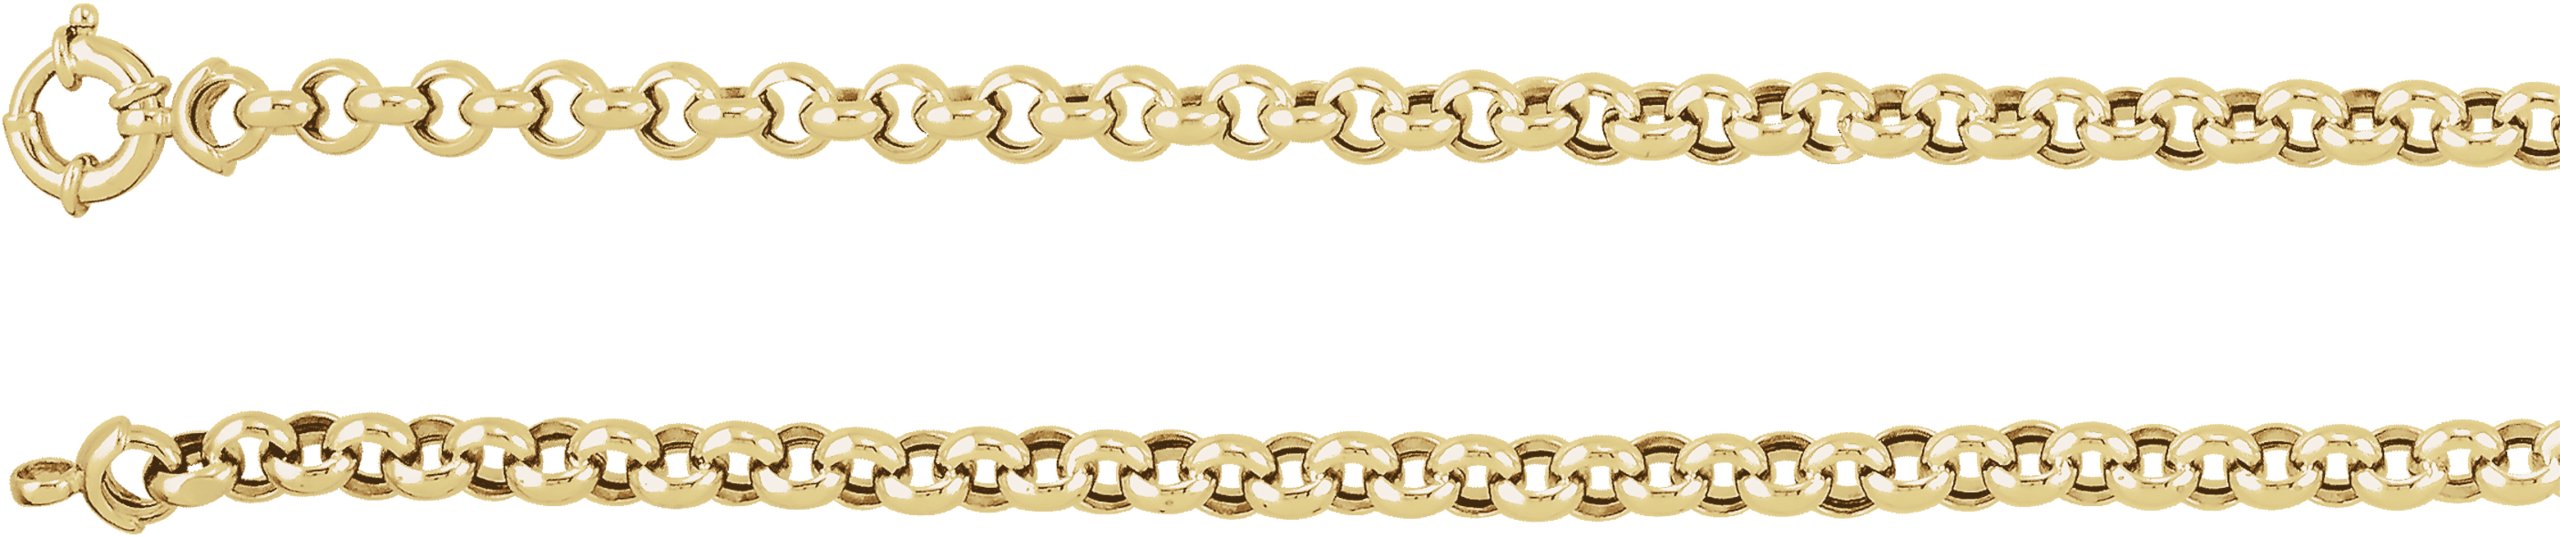 14K Yellow 6.5 mm Hollow Rolo 24" Chain
